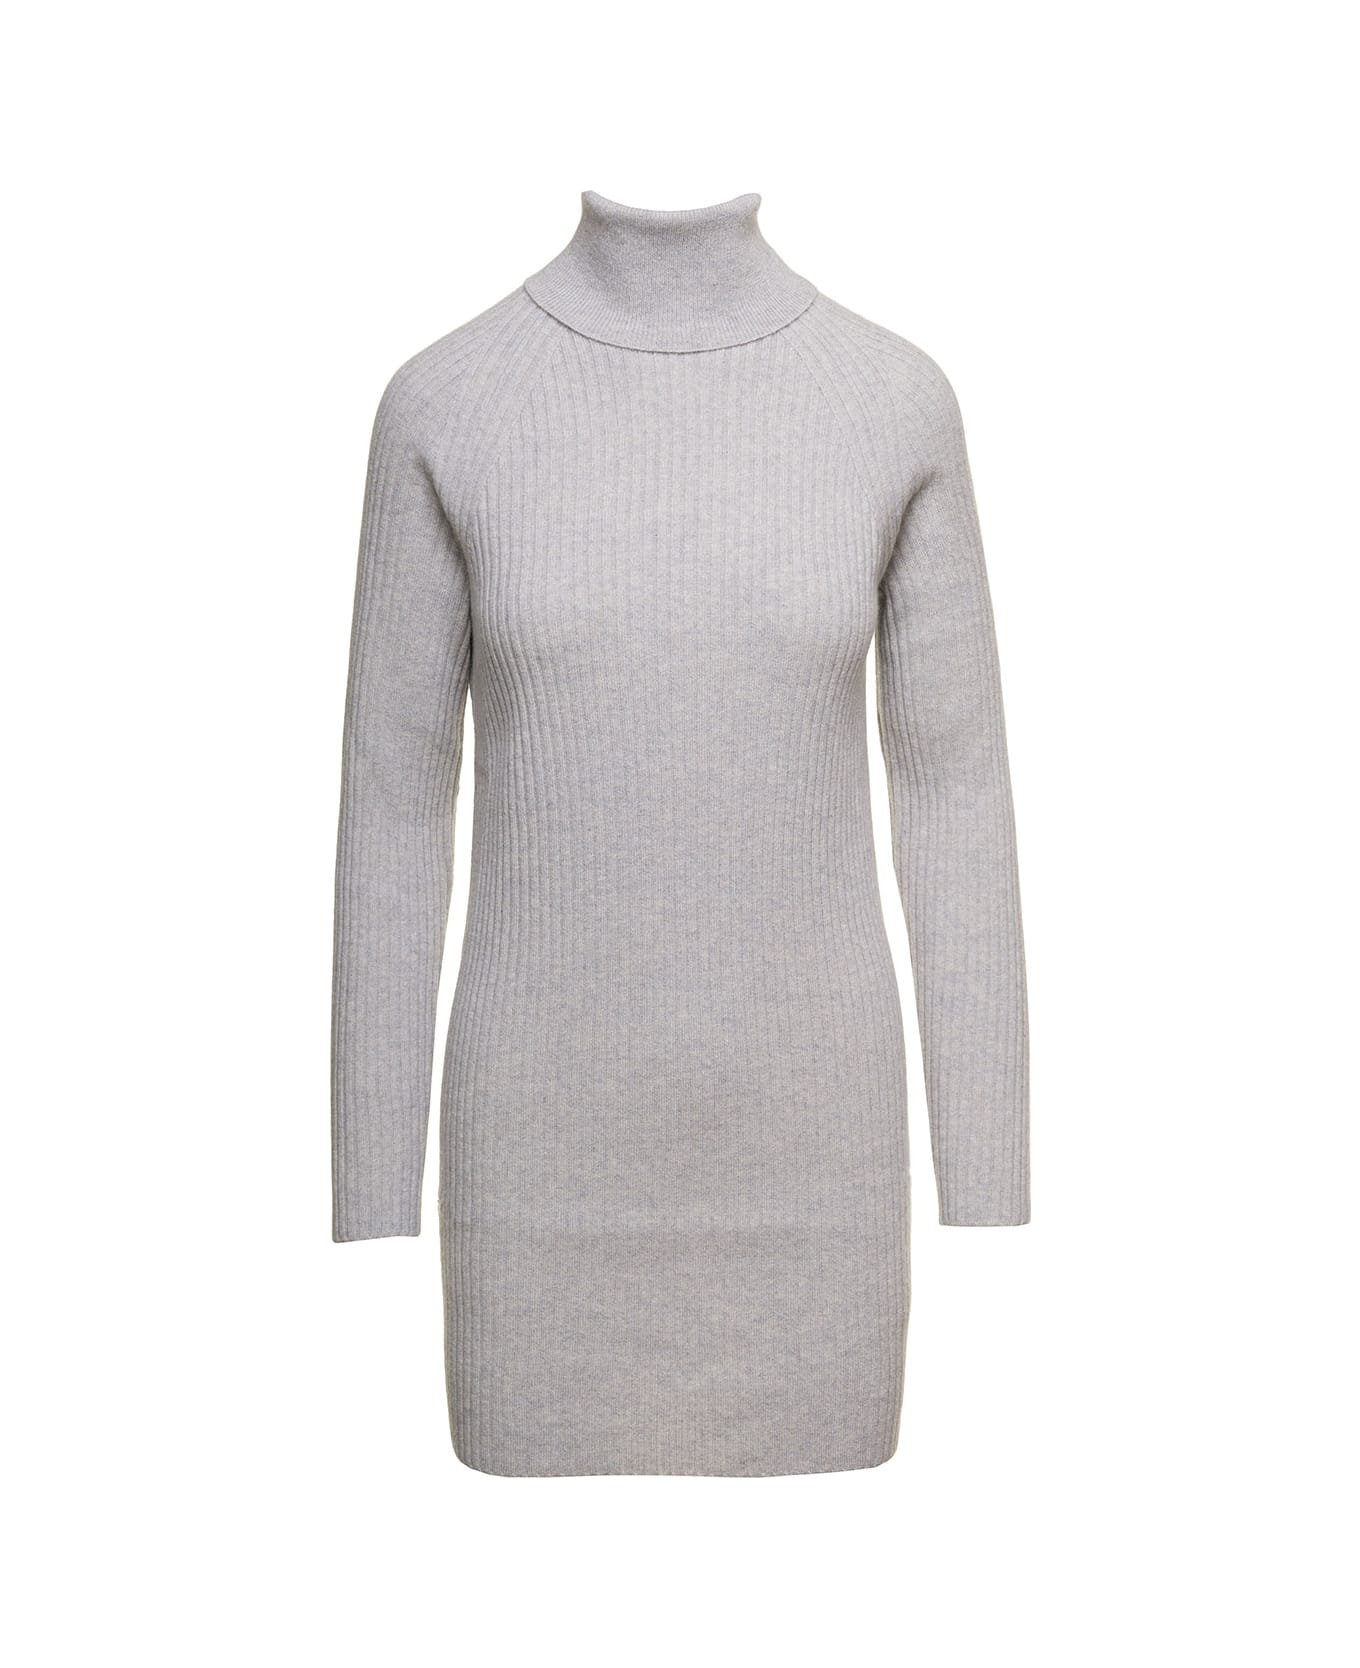 Antonelli Midi Grey Ribbed Dress In Wool. Silk And Cotton Blend Woman - Grey